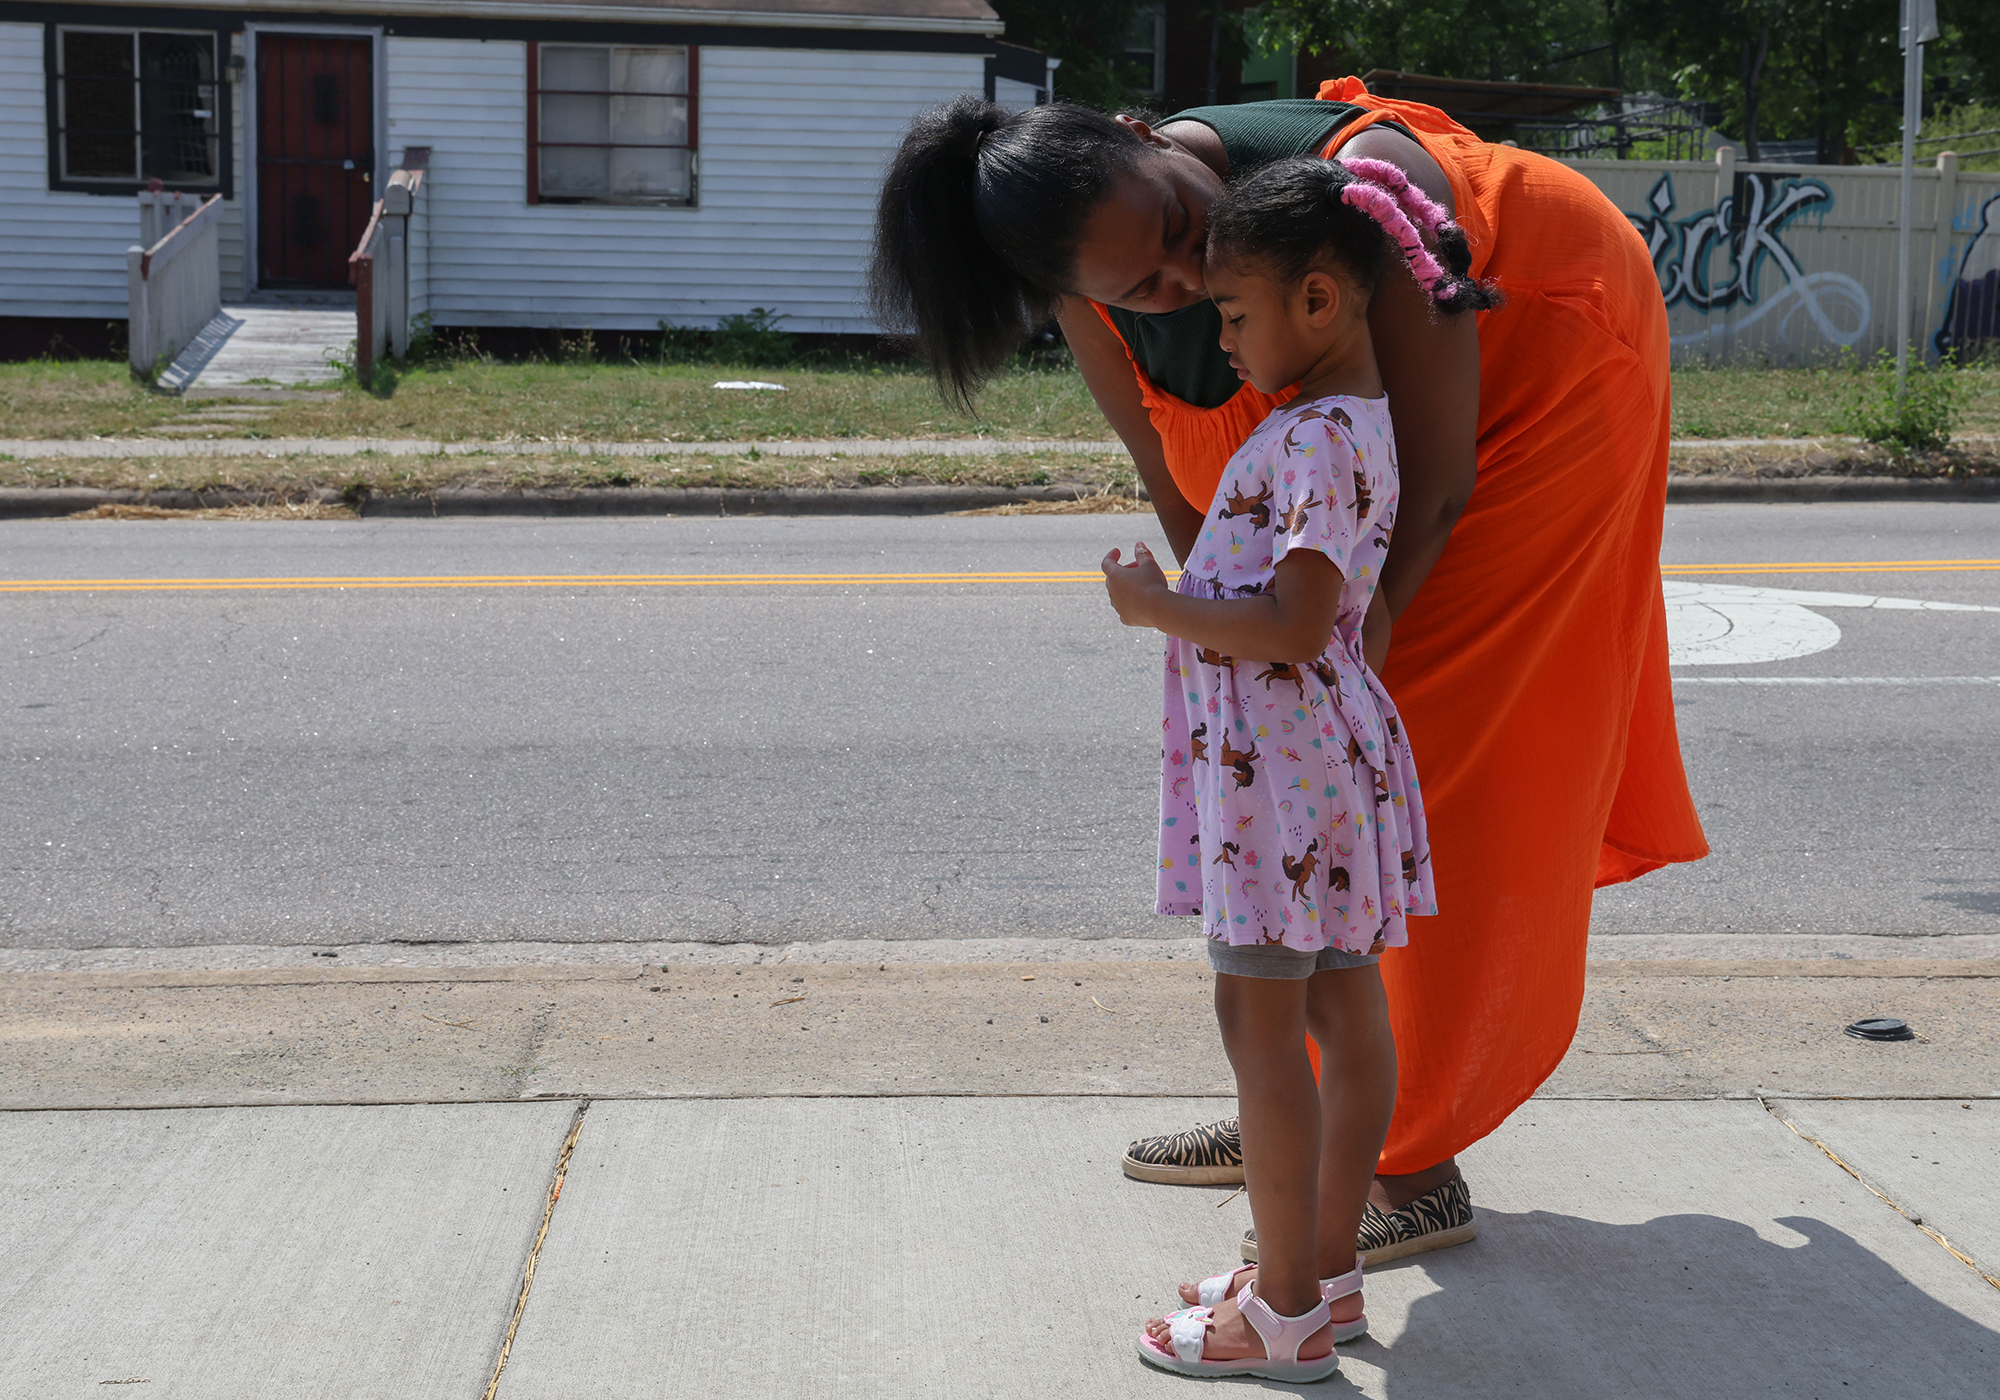 Maya Jackson, founder and executive director of MAAME Inc., walks through a Durham neighborhood with her daughter, Aminah. (Photo by Shelby Rae Wills/News21)